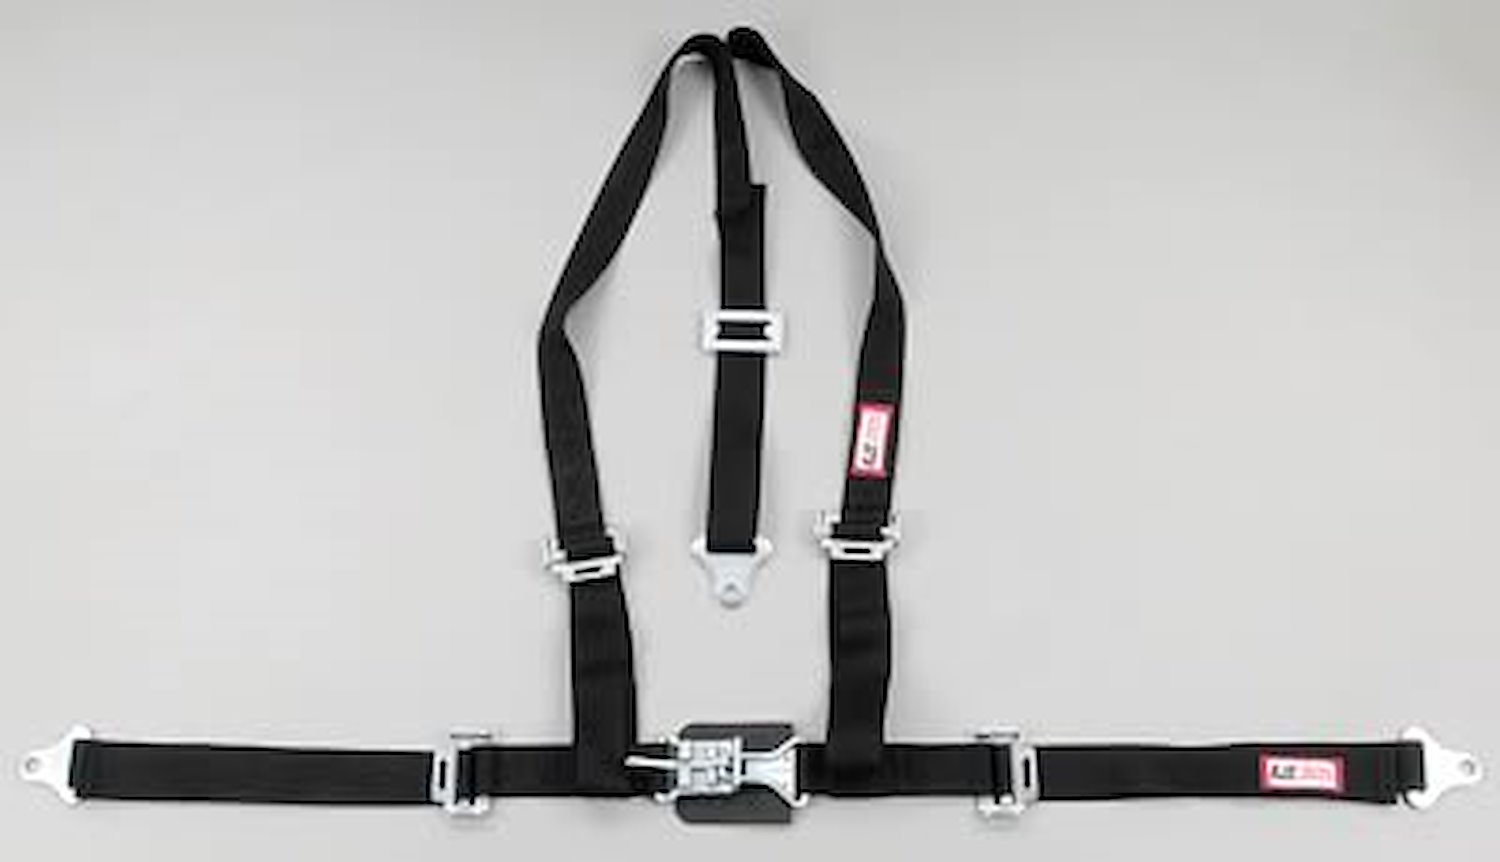 NON-SFI L&L HARNESS 3 PULL DOWN Lap BELT SEWN IN 2 S.H. Y FLOOR Mount ALL WRAP ENDS ORANGE